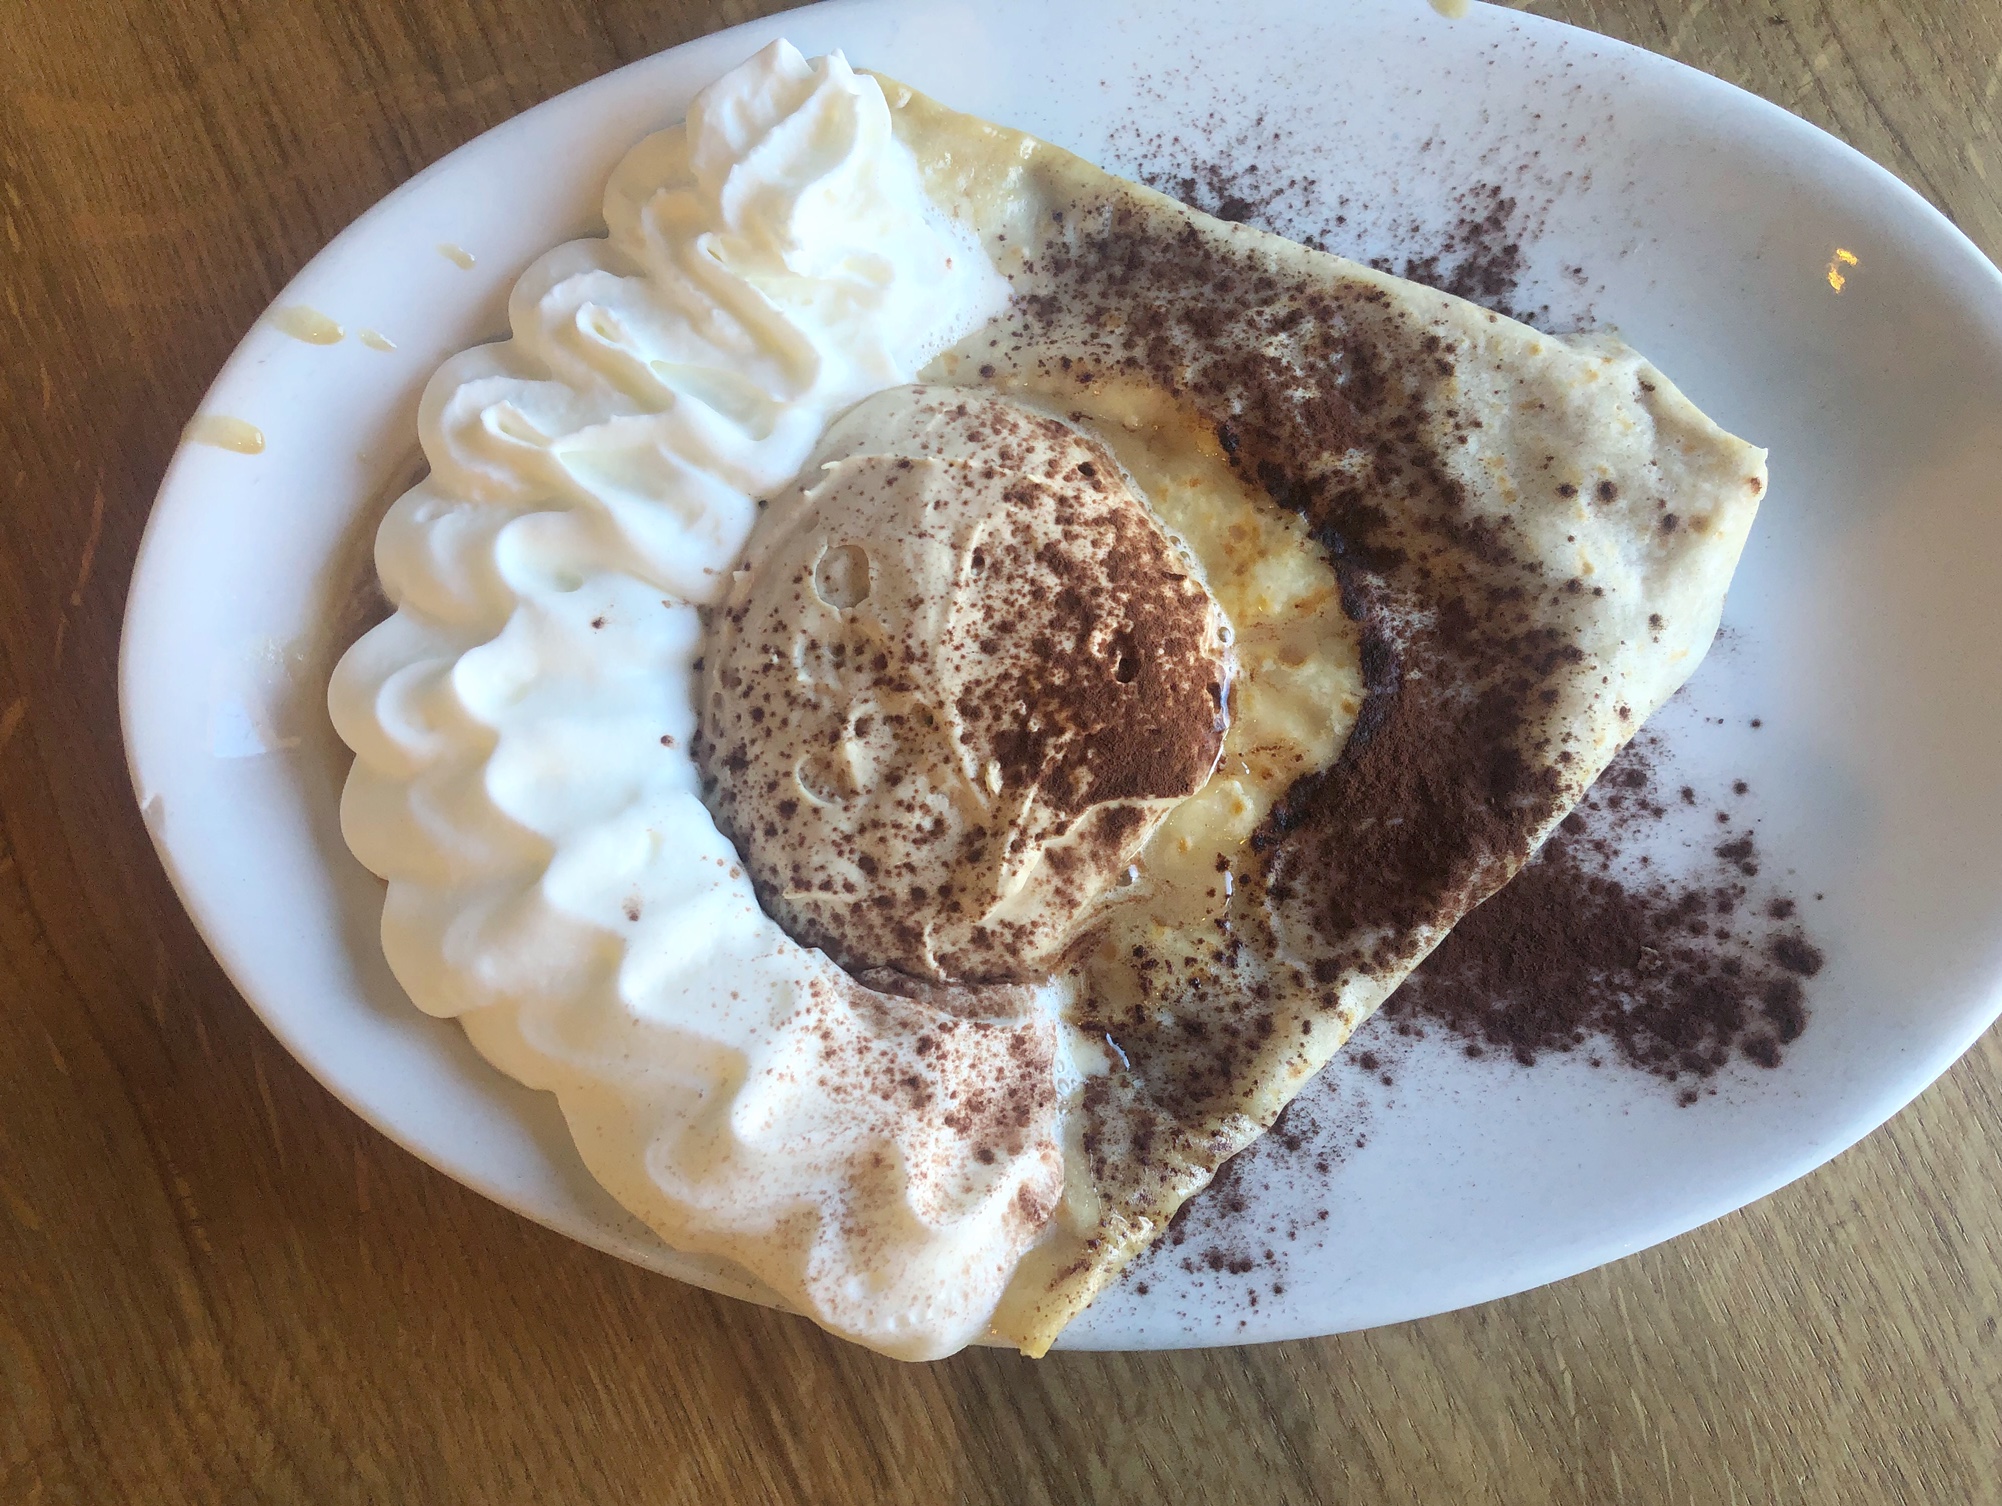 On a wooden table, there is a white plate with a tiramisu crepe on it. The crepe has whipped cream topping at the top of the triangle, a dollop of espresso whipped cream in the middle, and a dusting of cocoa powder all over. Photo by Alyssa Buckley.